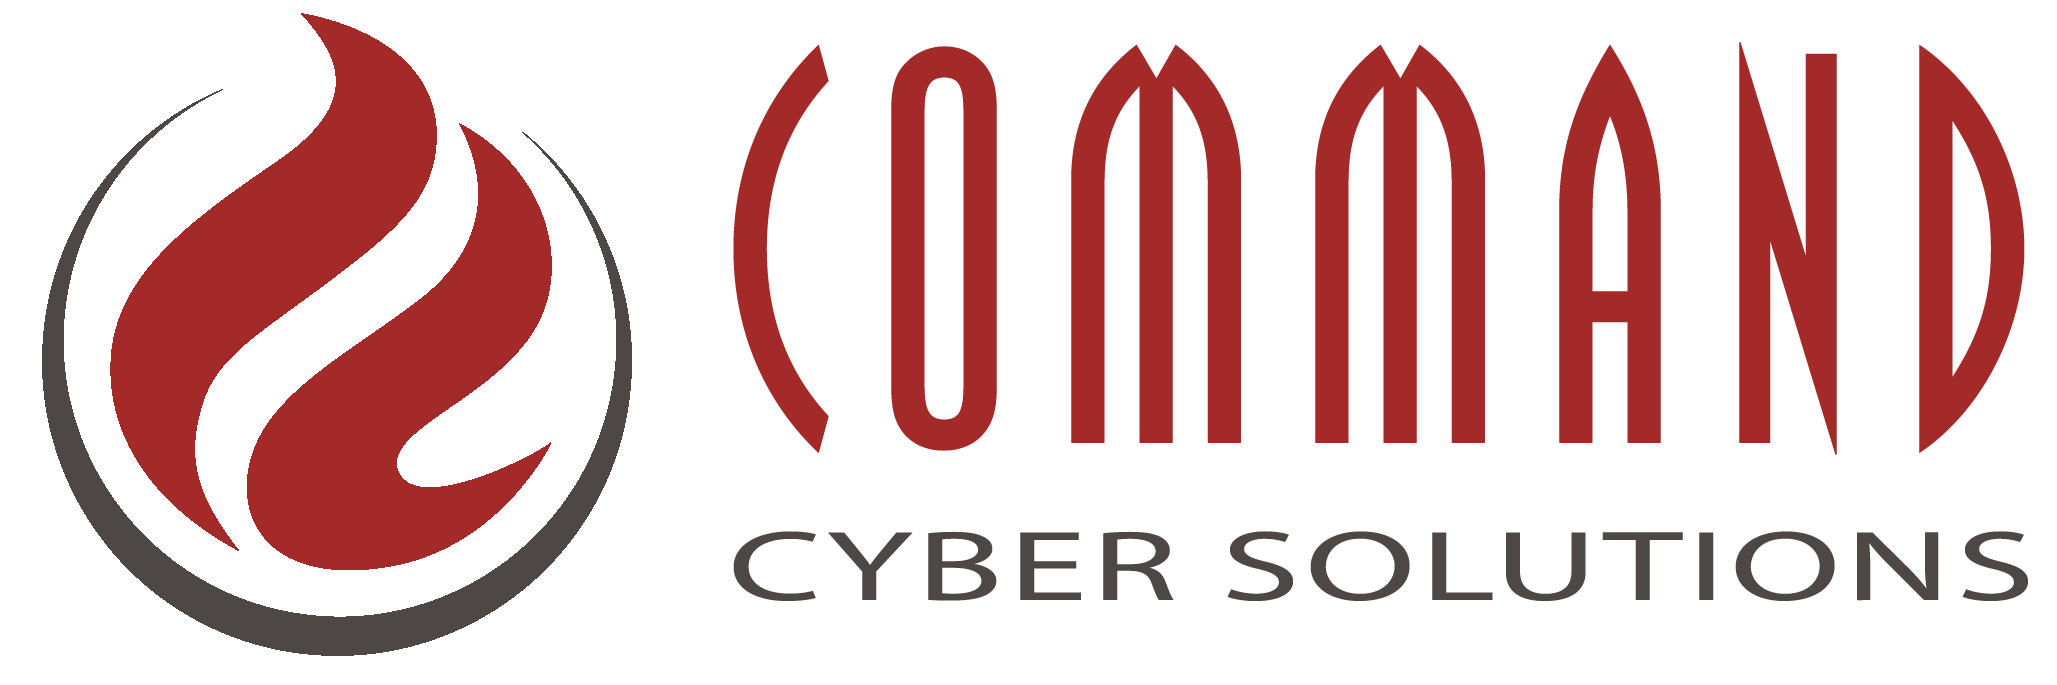 *Command Cyber